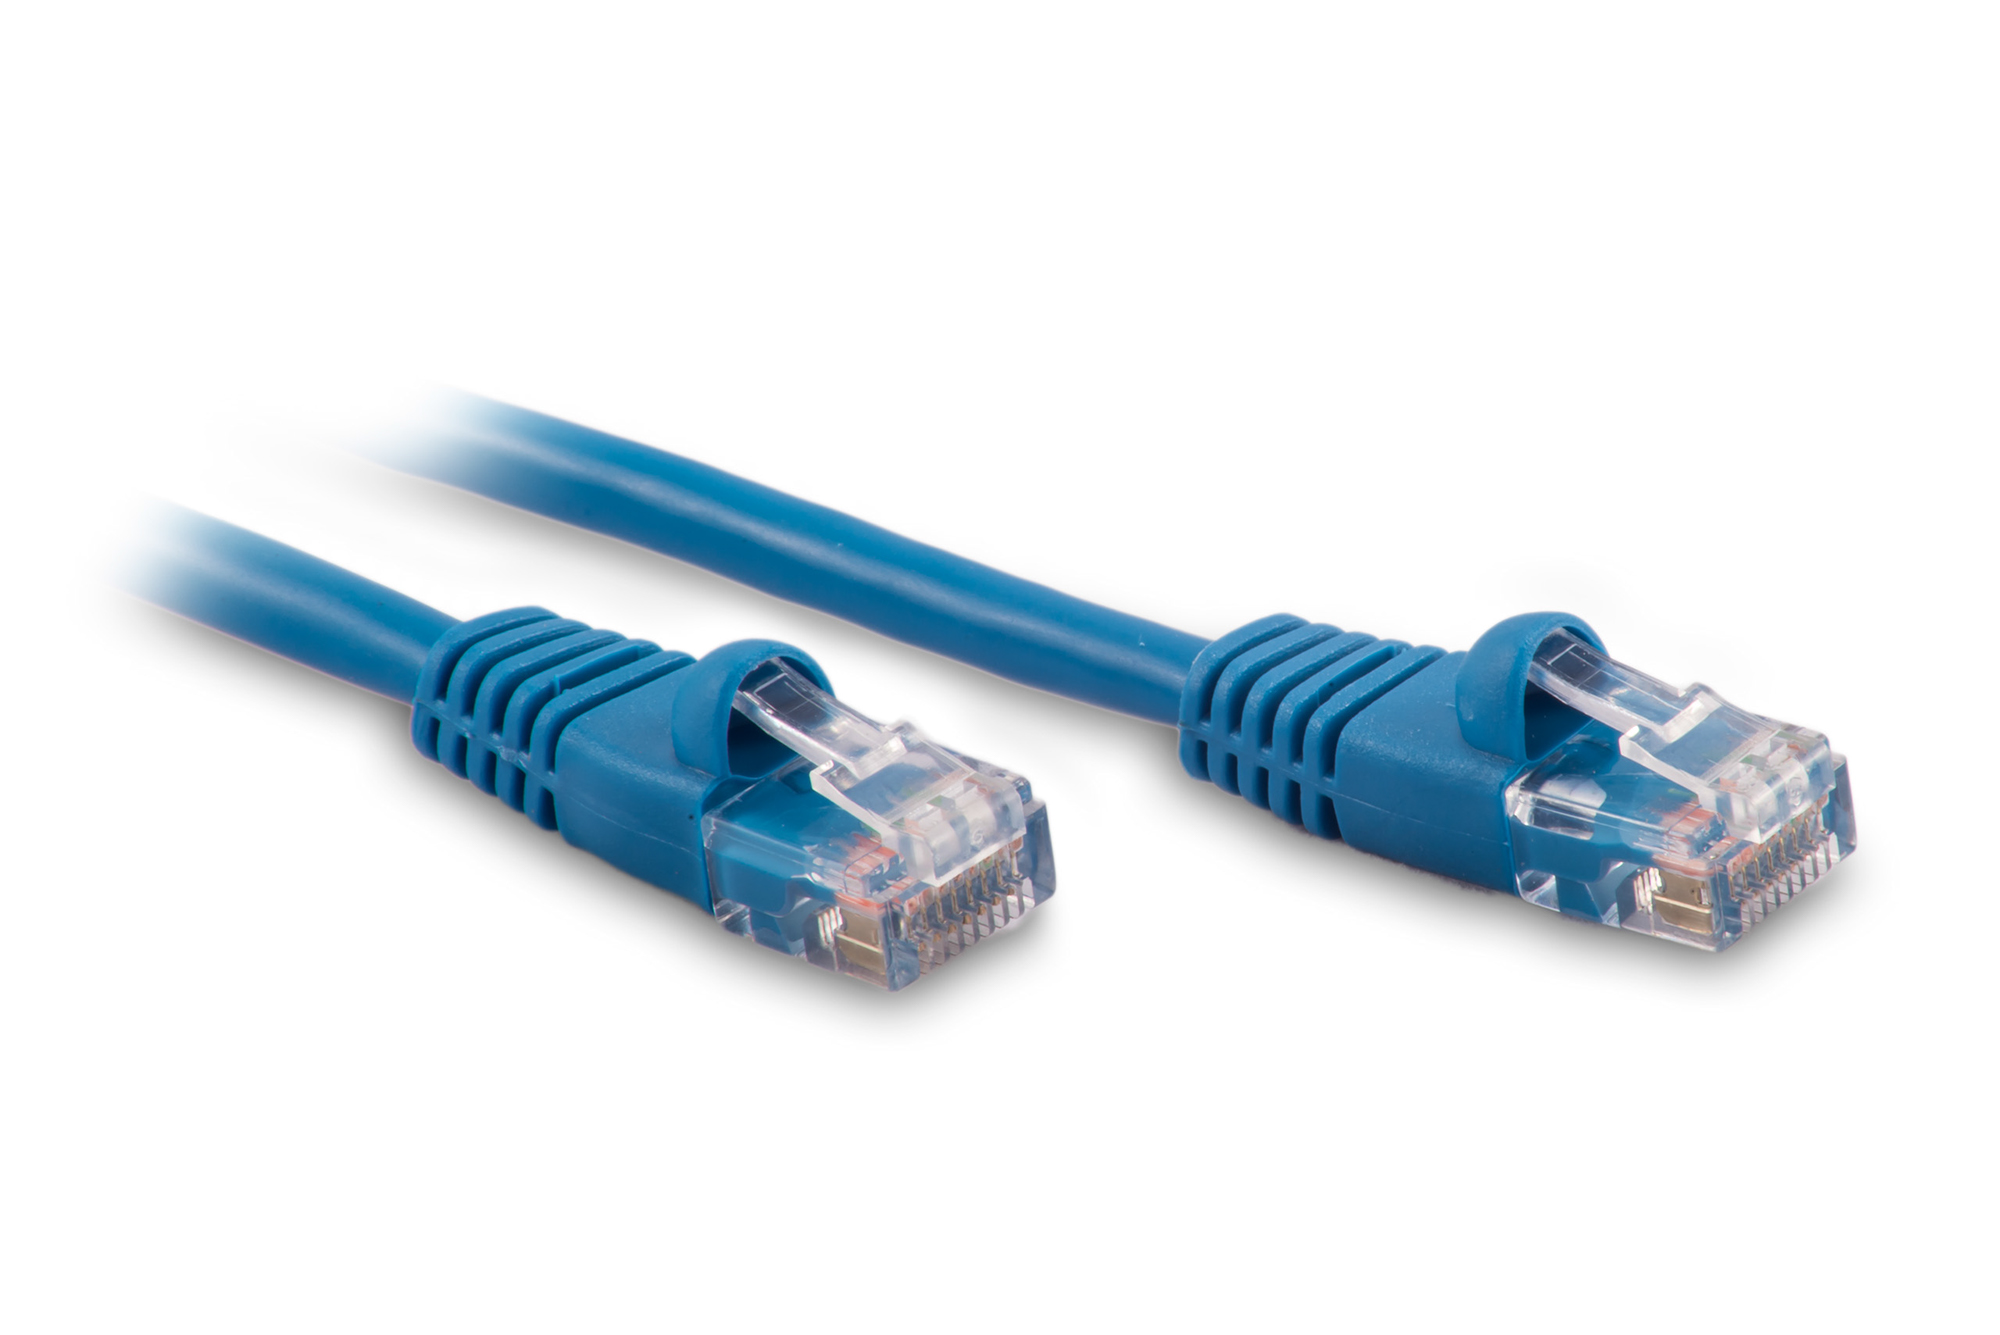 50ft Cat6 Ethernet Patch Cable - Blue Color - Snagless Boot